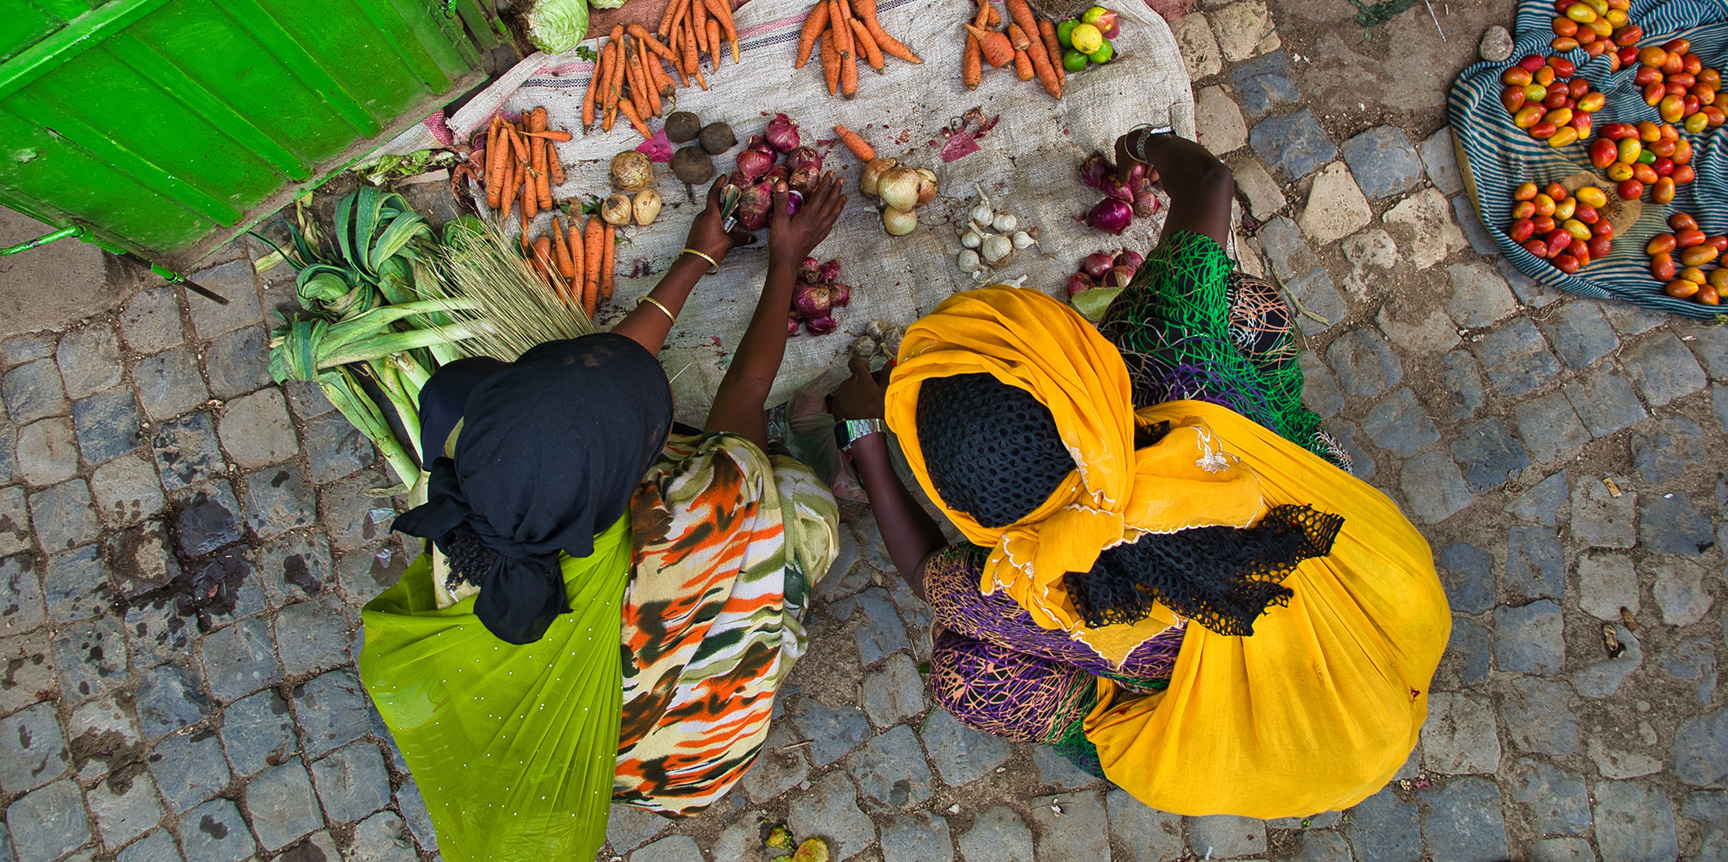 Enlarged view: Photo of two African women on a market